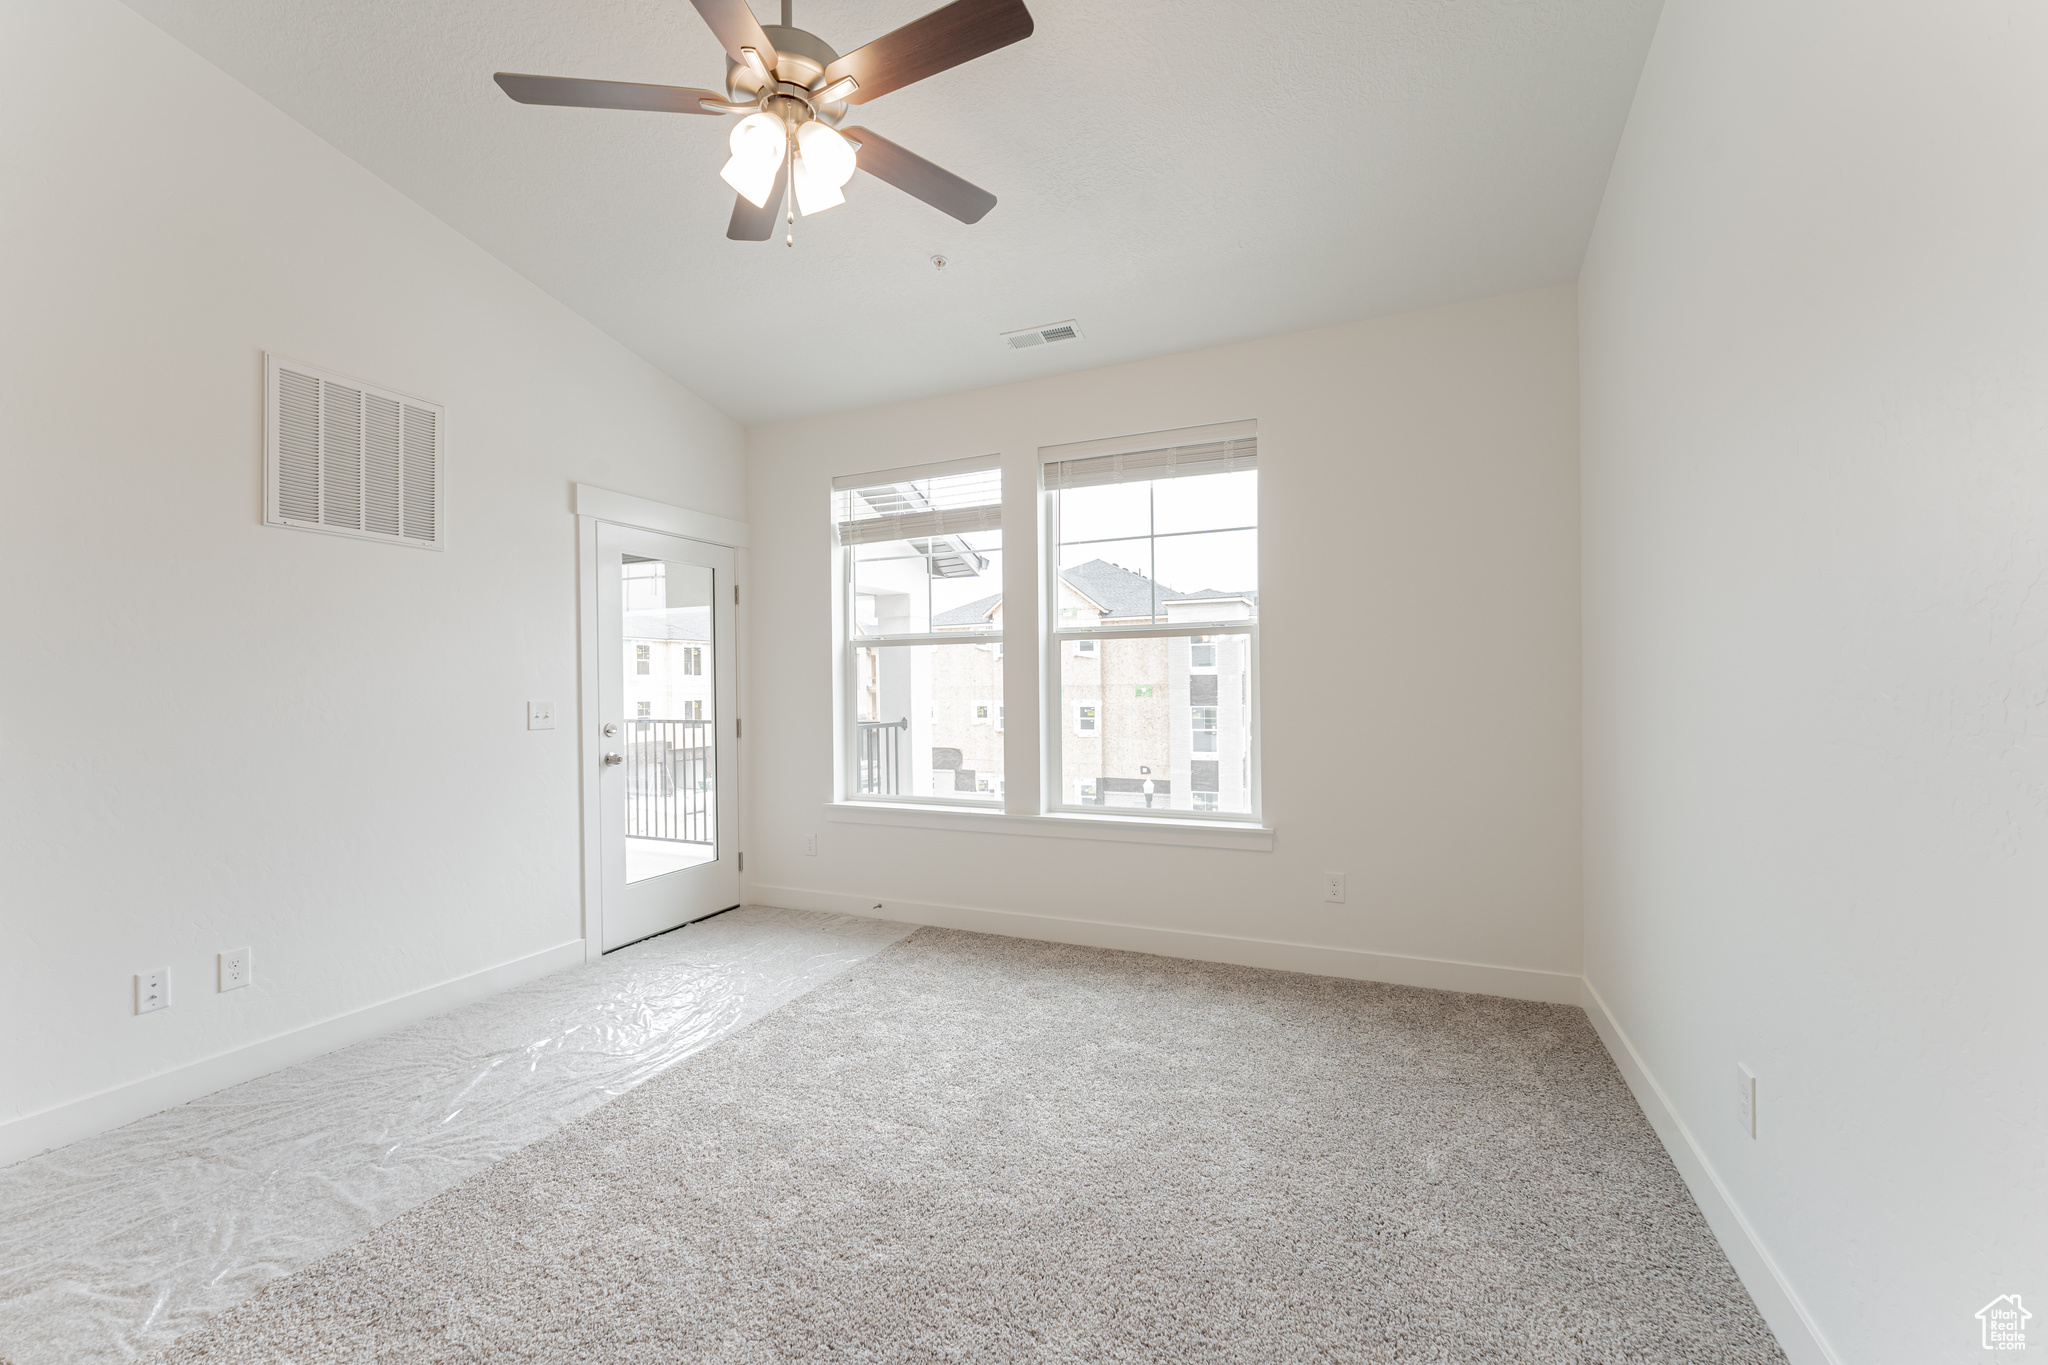 Carpeted empty room featuring vaulted ceiling, a healthy amount of sunlight, and ceiling fan